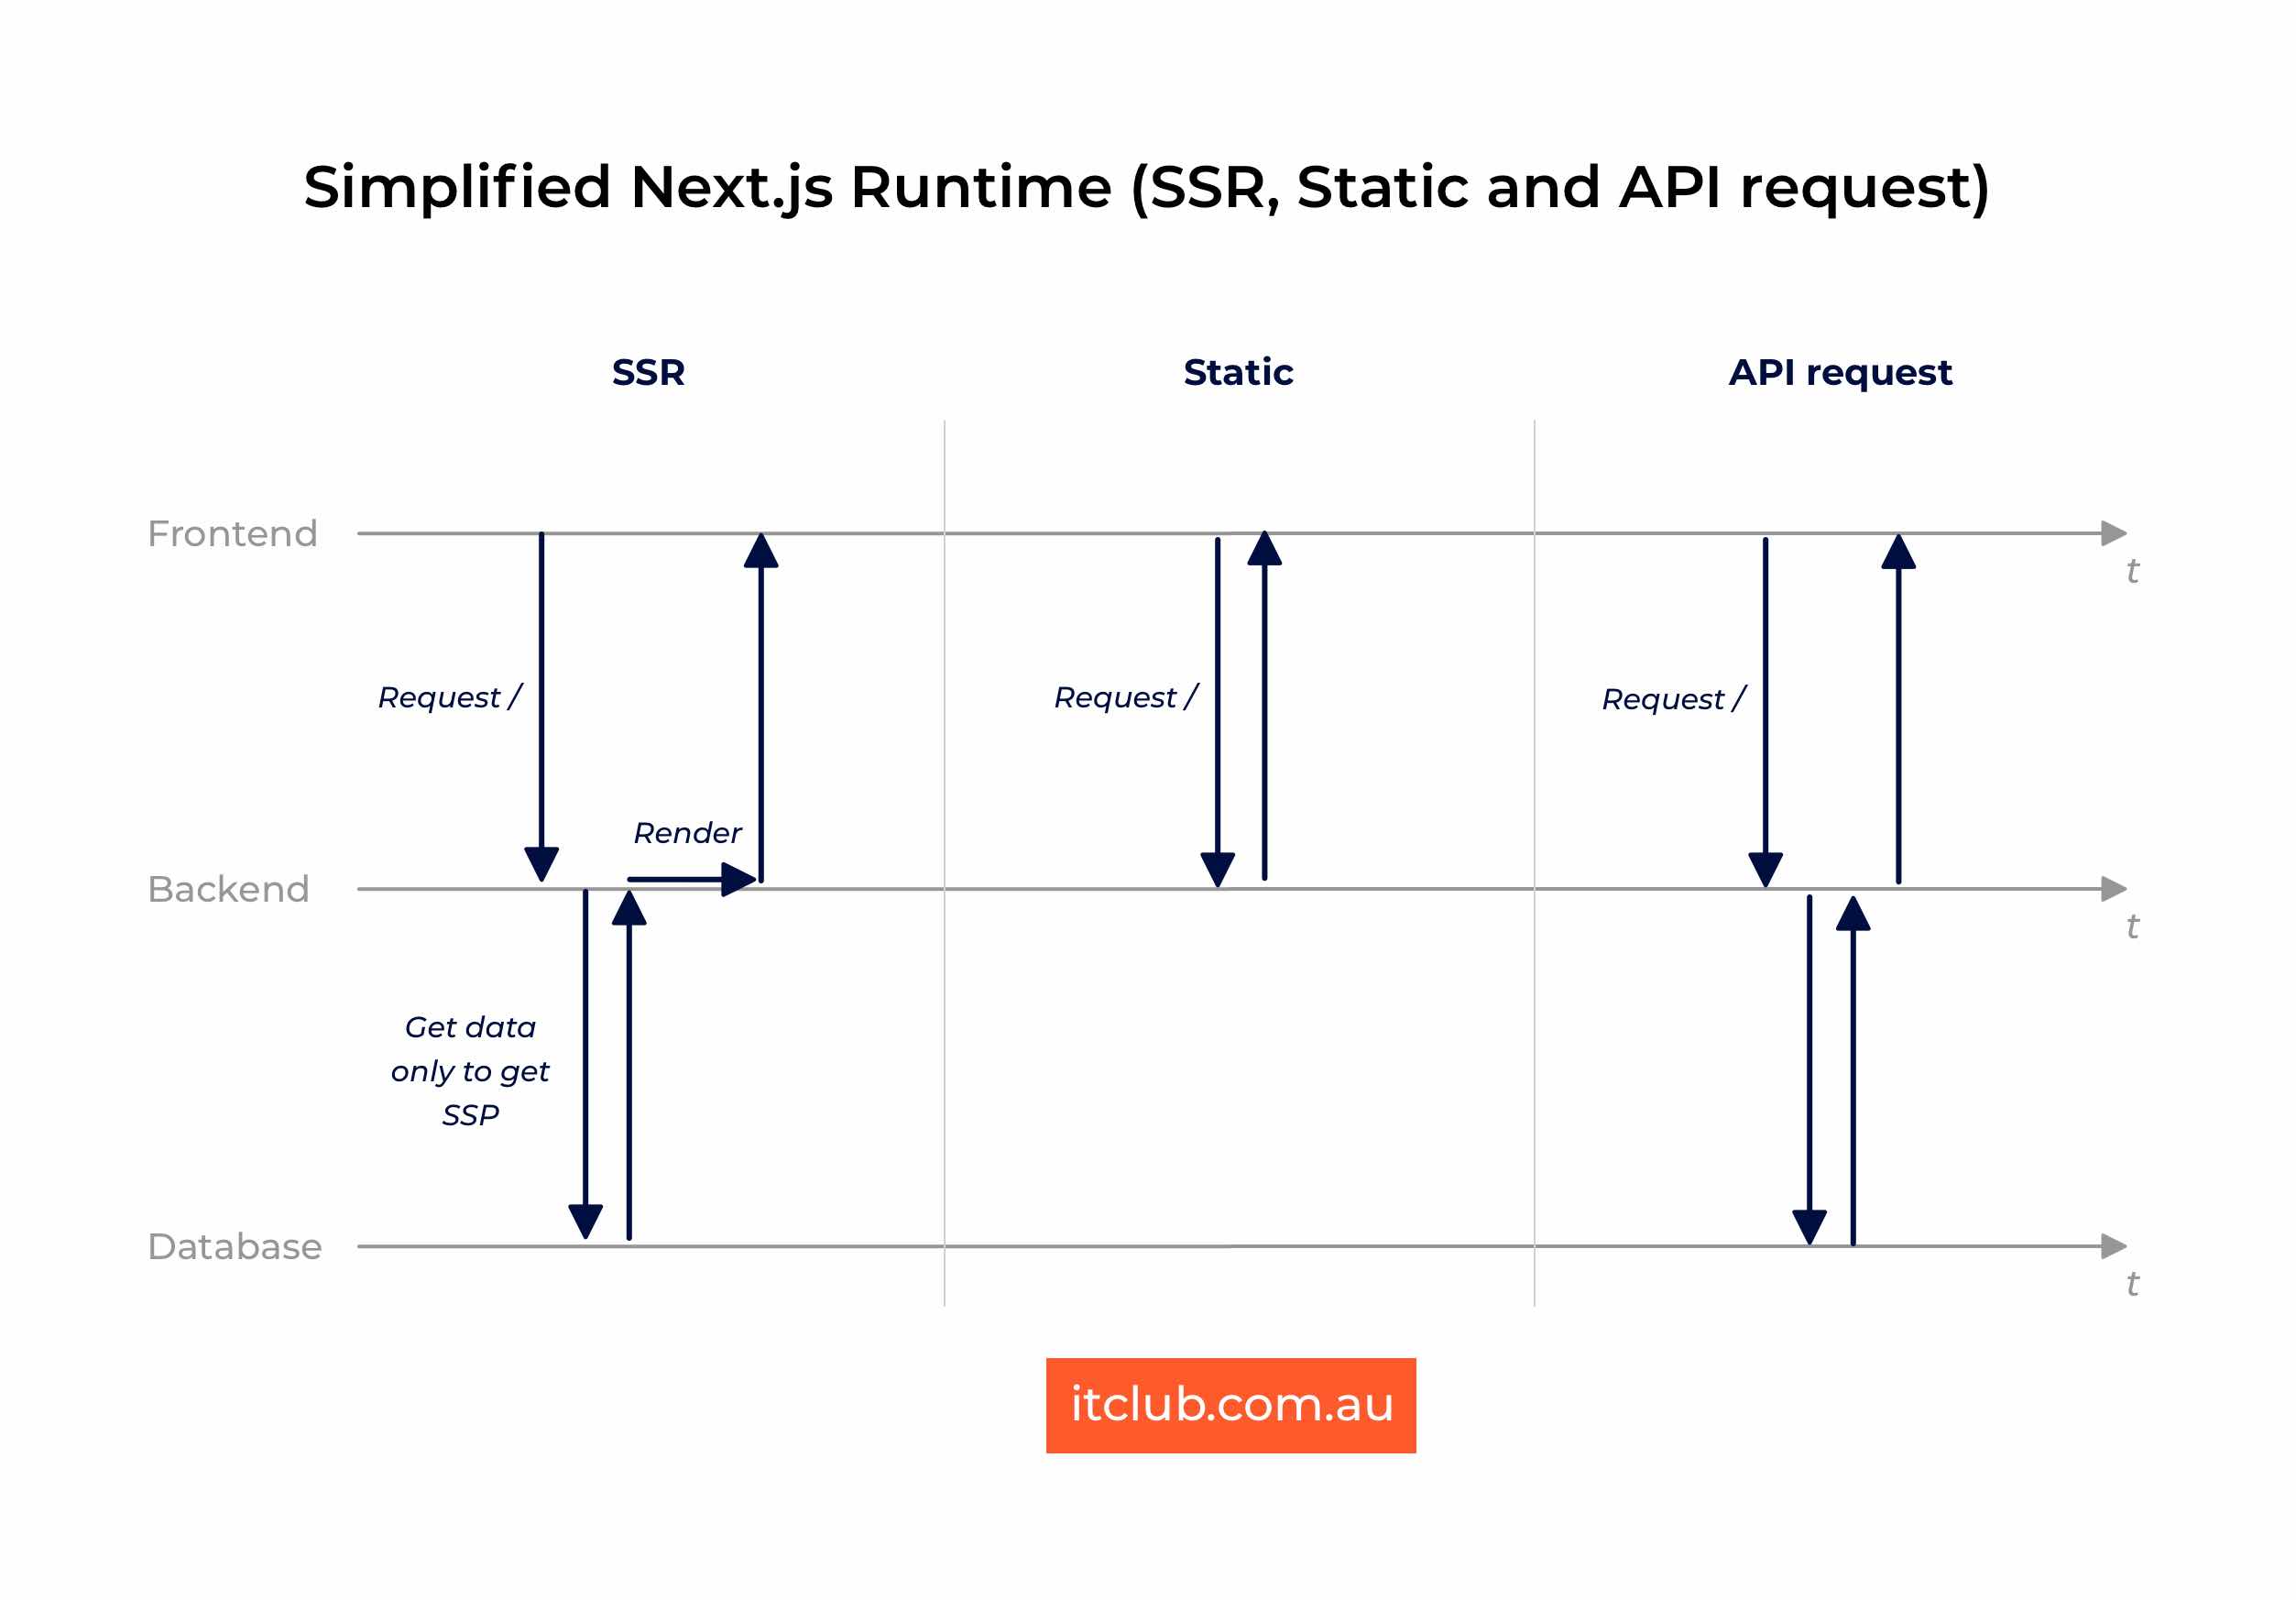 Simplified Next js runtime diagram SSR Static API request